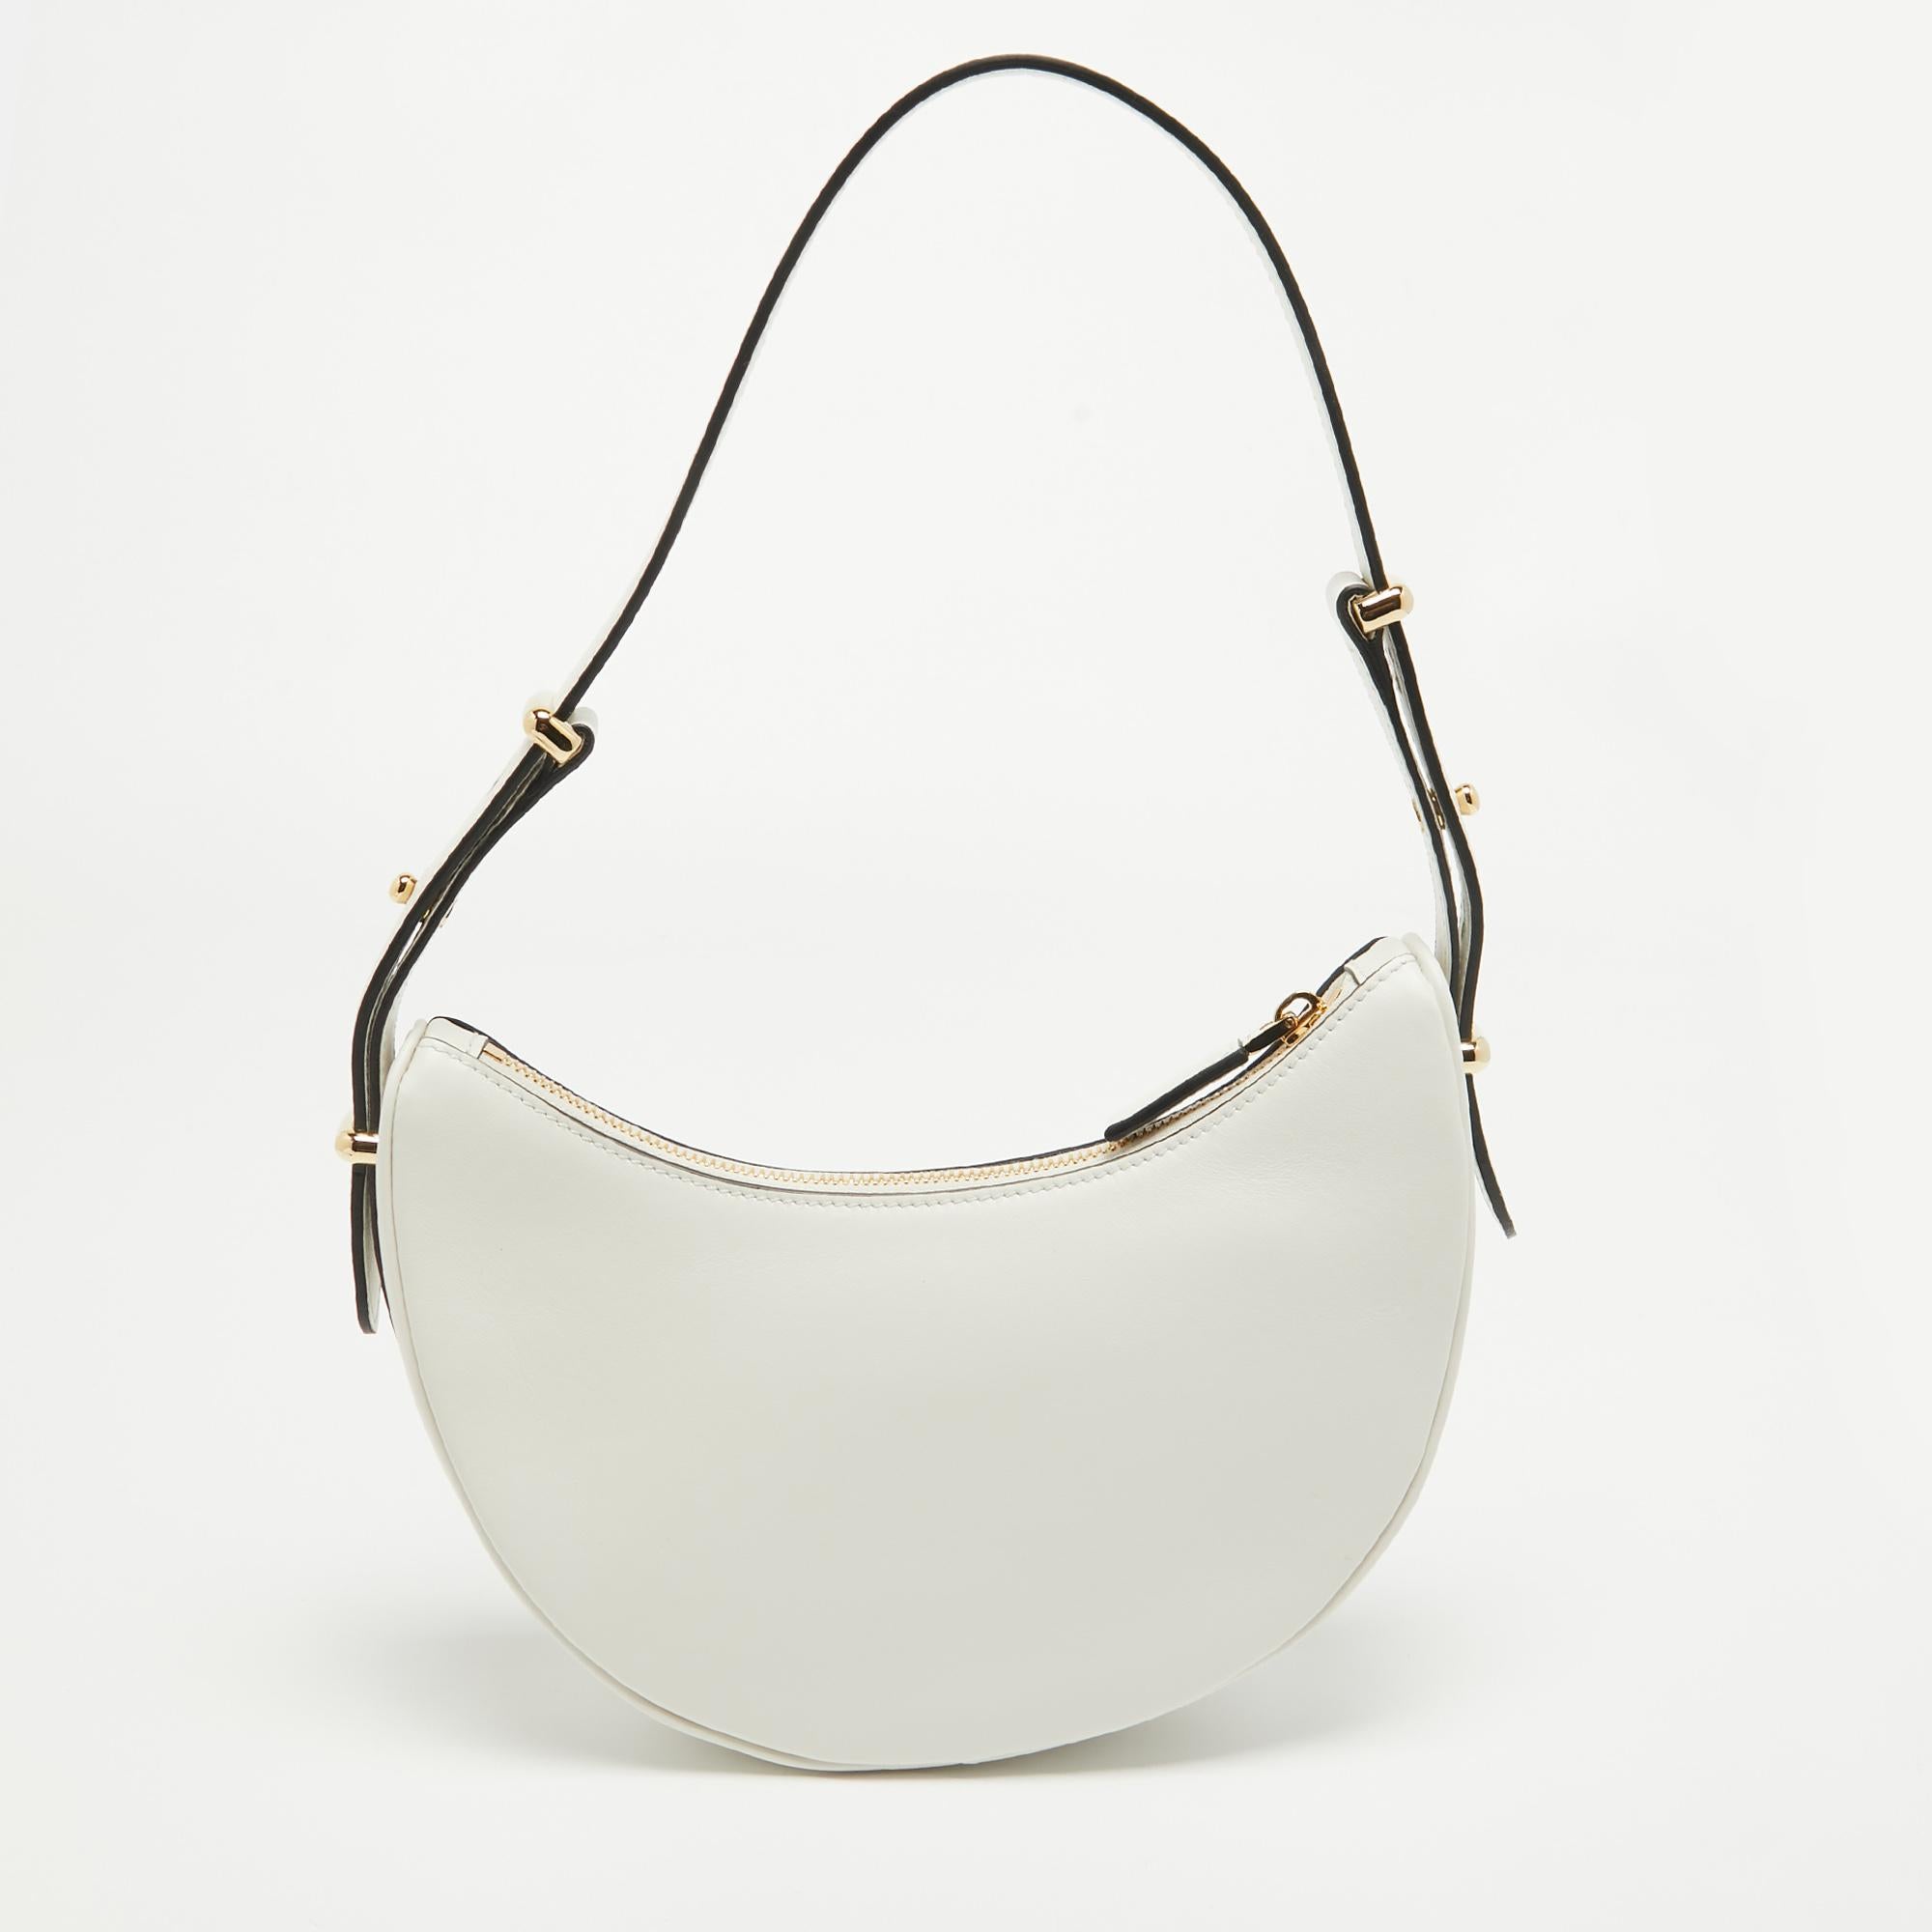 Crafted from pristine white leather, the Prada Arqué Bag exudes understated luxury. Its sleek silhouette is accentuated by delicate stitching and a subtle logo. With a spacious interior and adjustable shoulder strap, it seamlessly combines